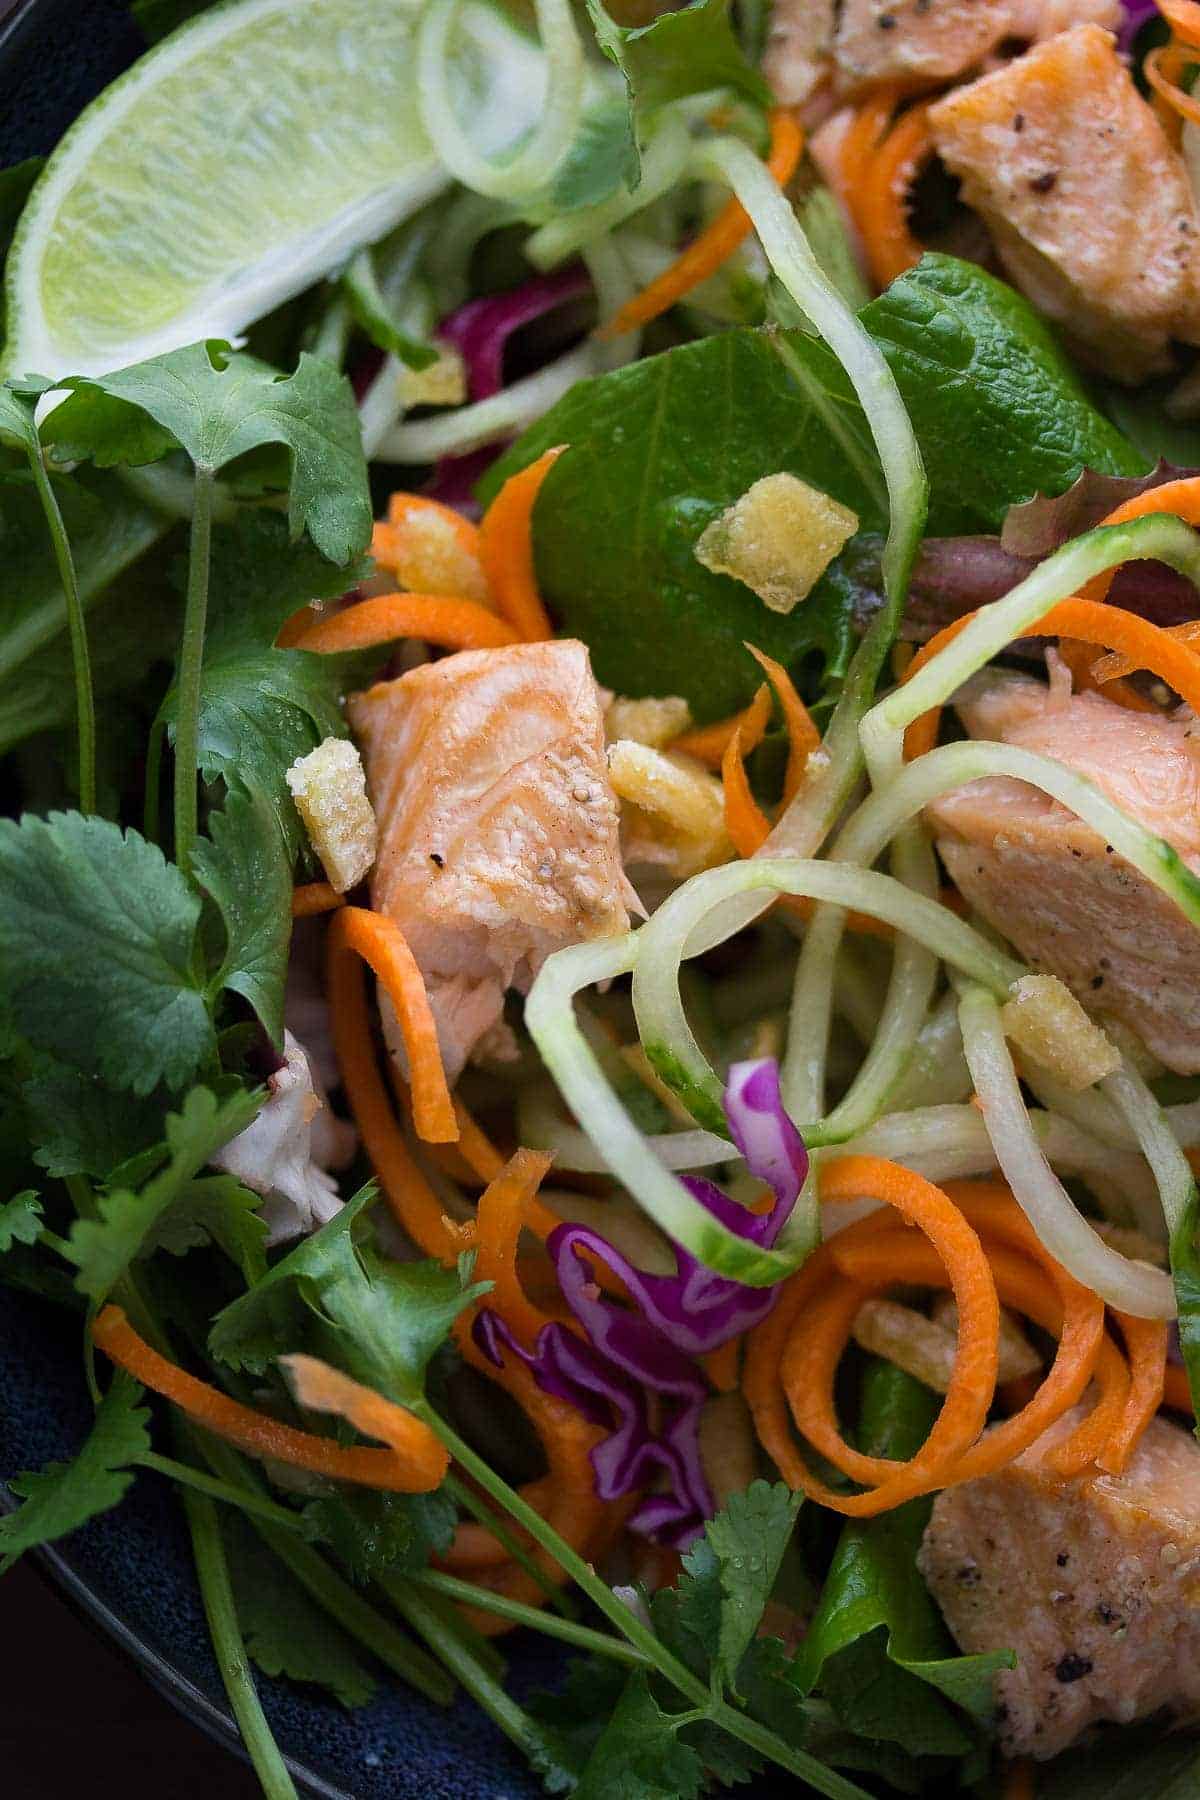 Asian Salad with Salmon, Ginger, and Lime Dressing, a healthy dinner recipe that's ready in 30 minutes!